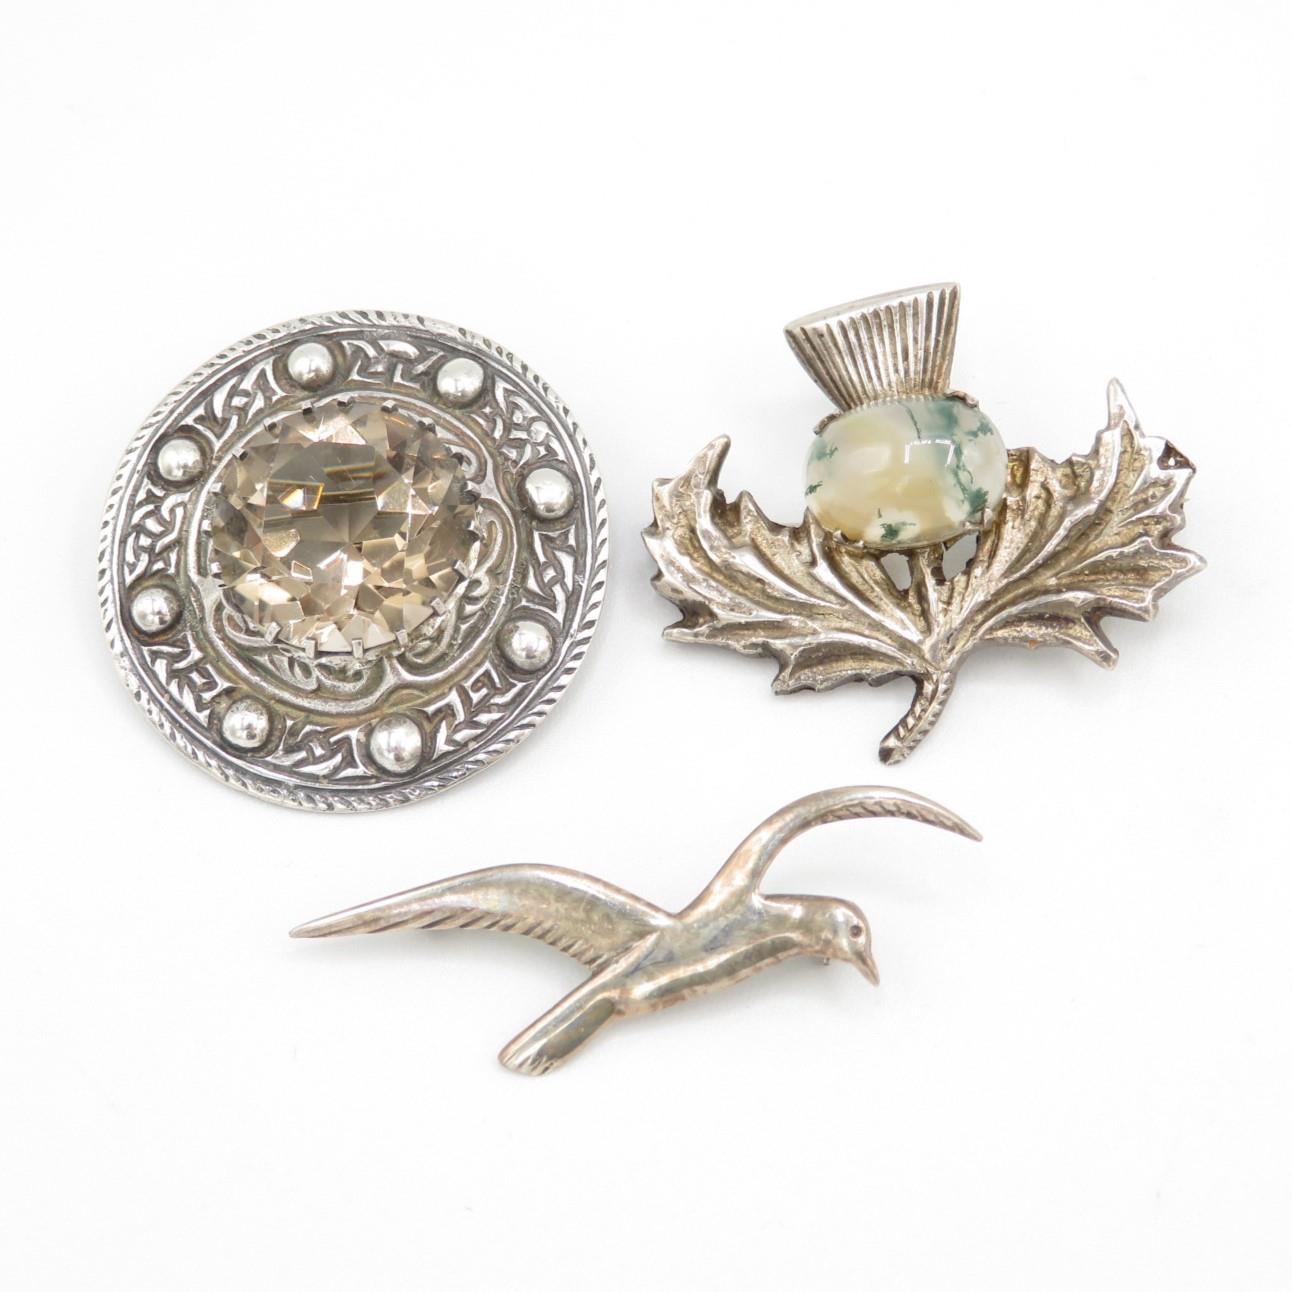 Three silver Scottish brooches including Ola Gorie (29g)